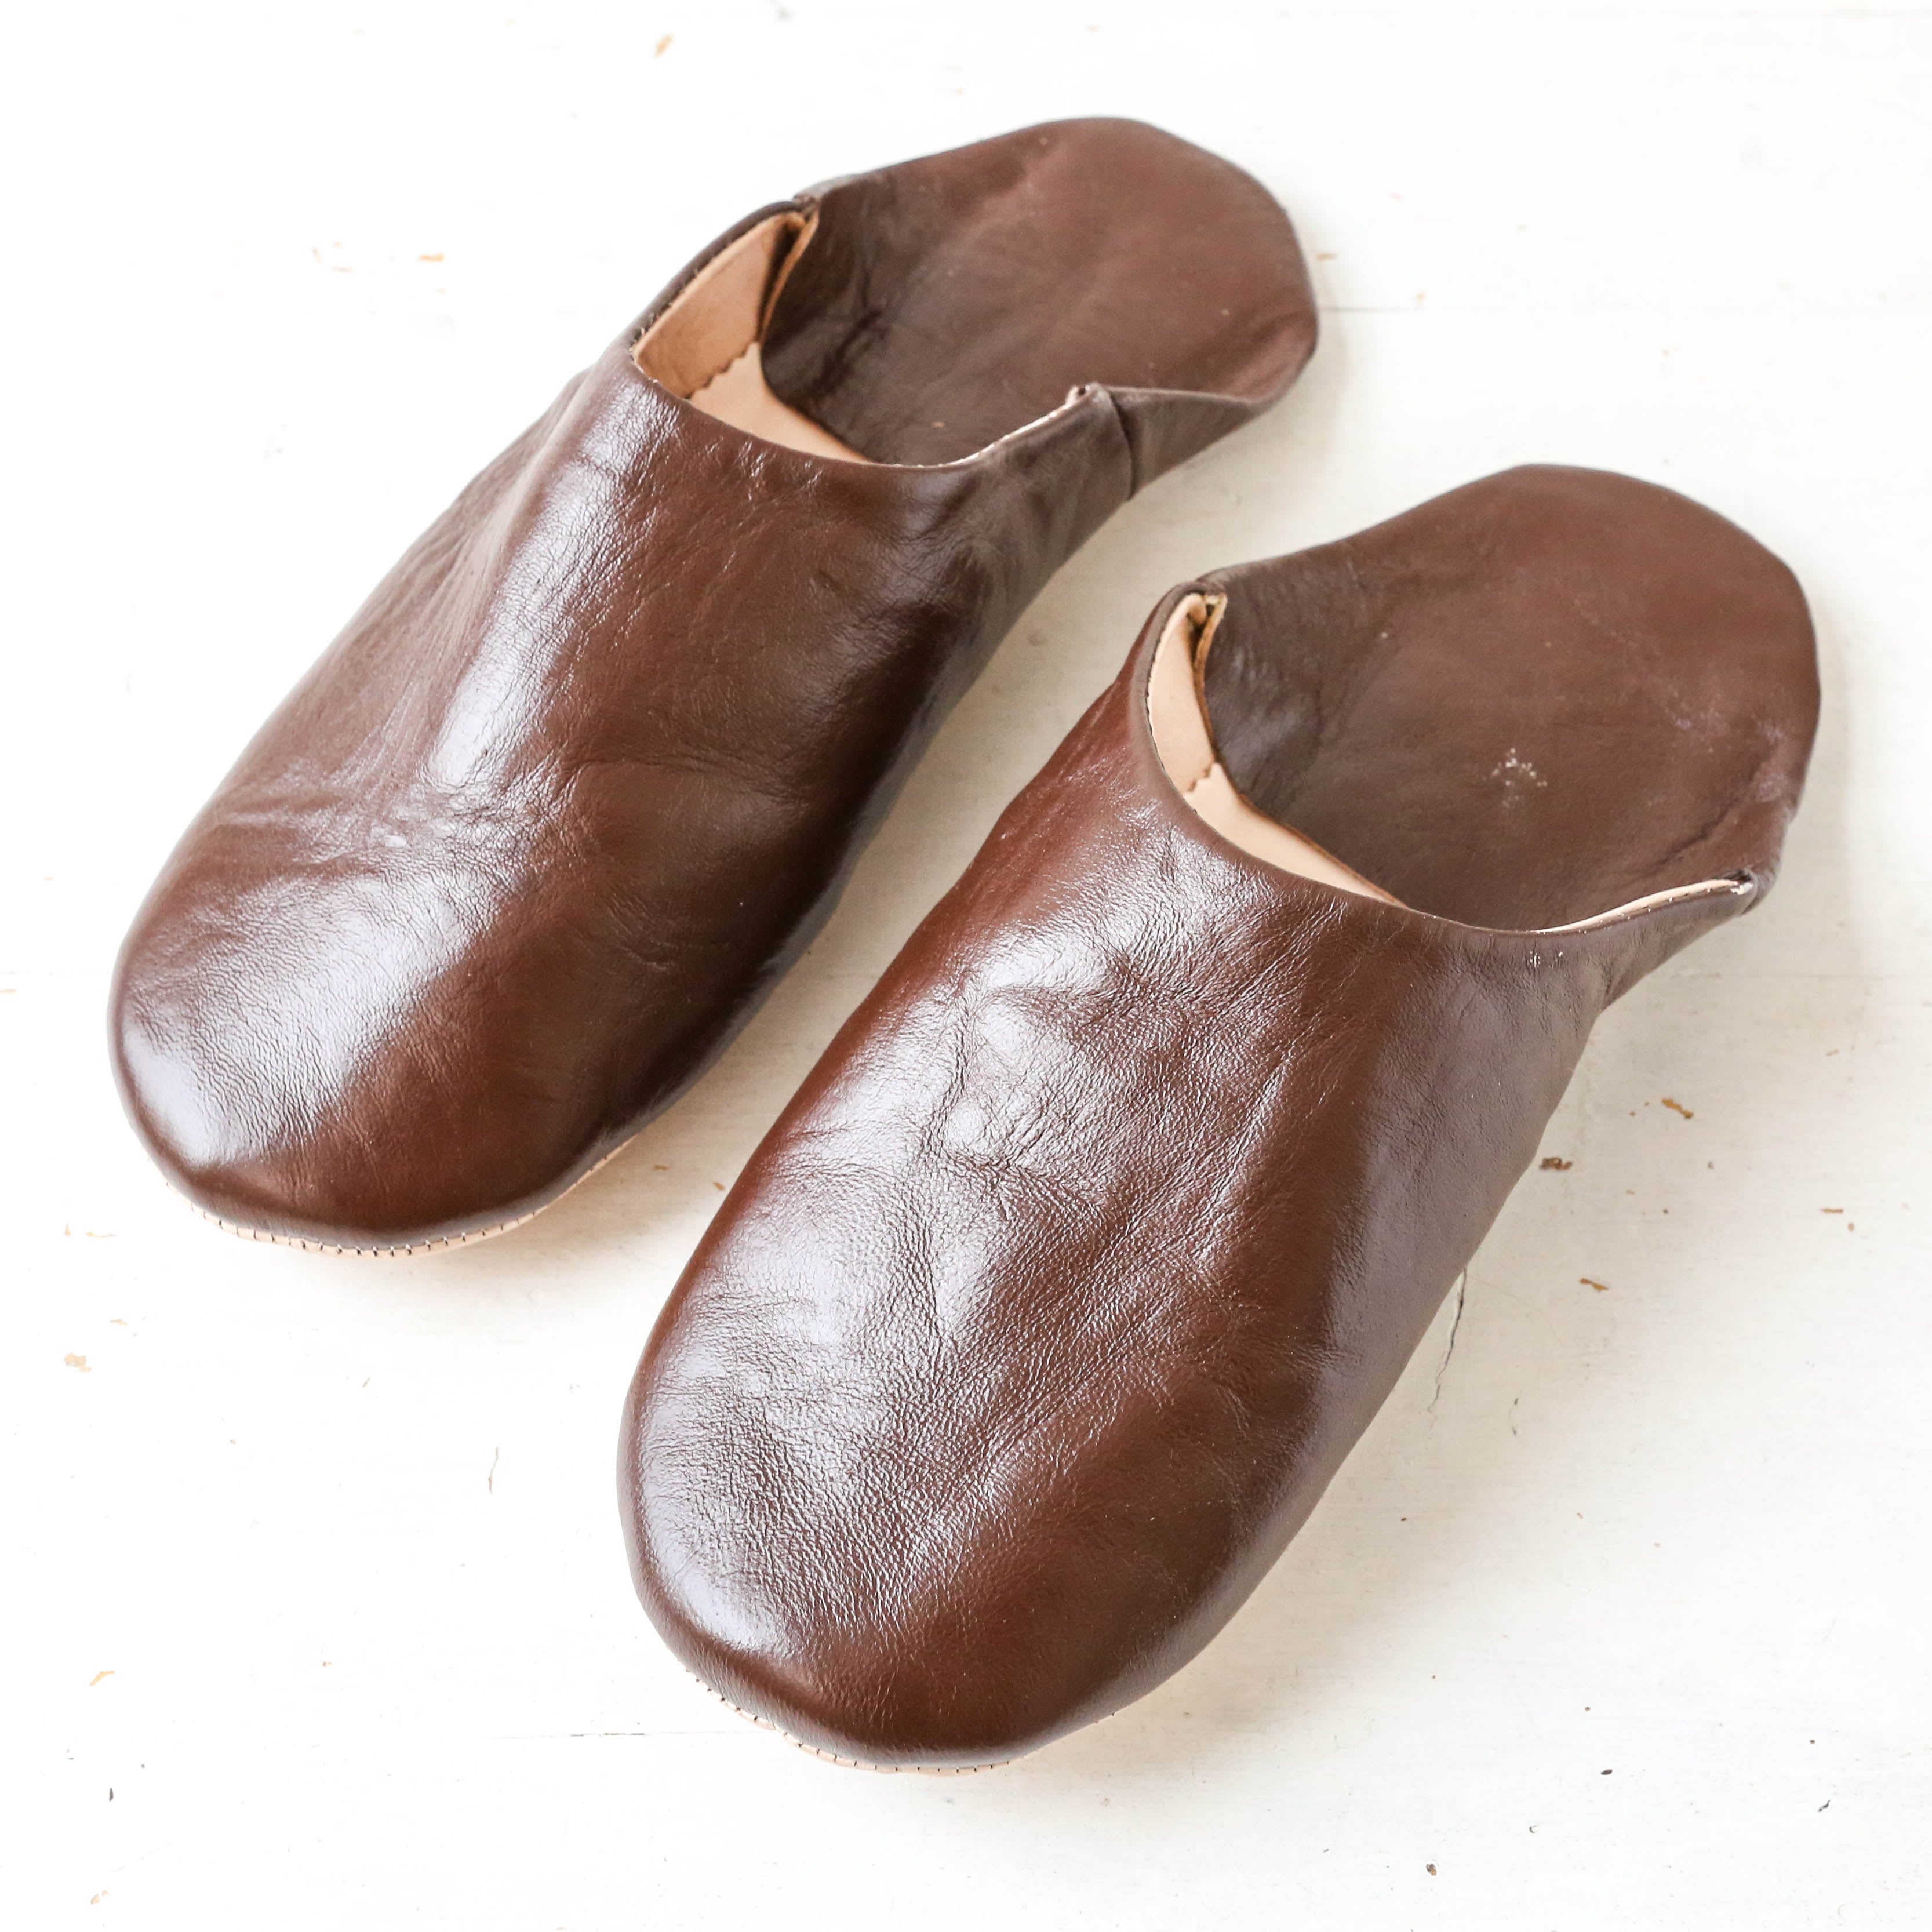 Bohemia Mens Moroccan Leather Babouche Slippers - Chocolate